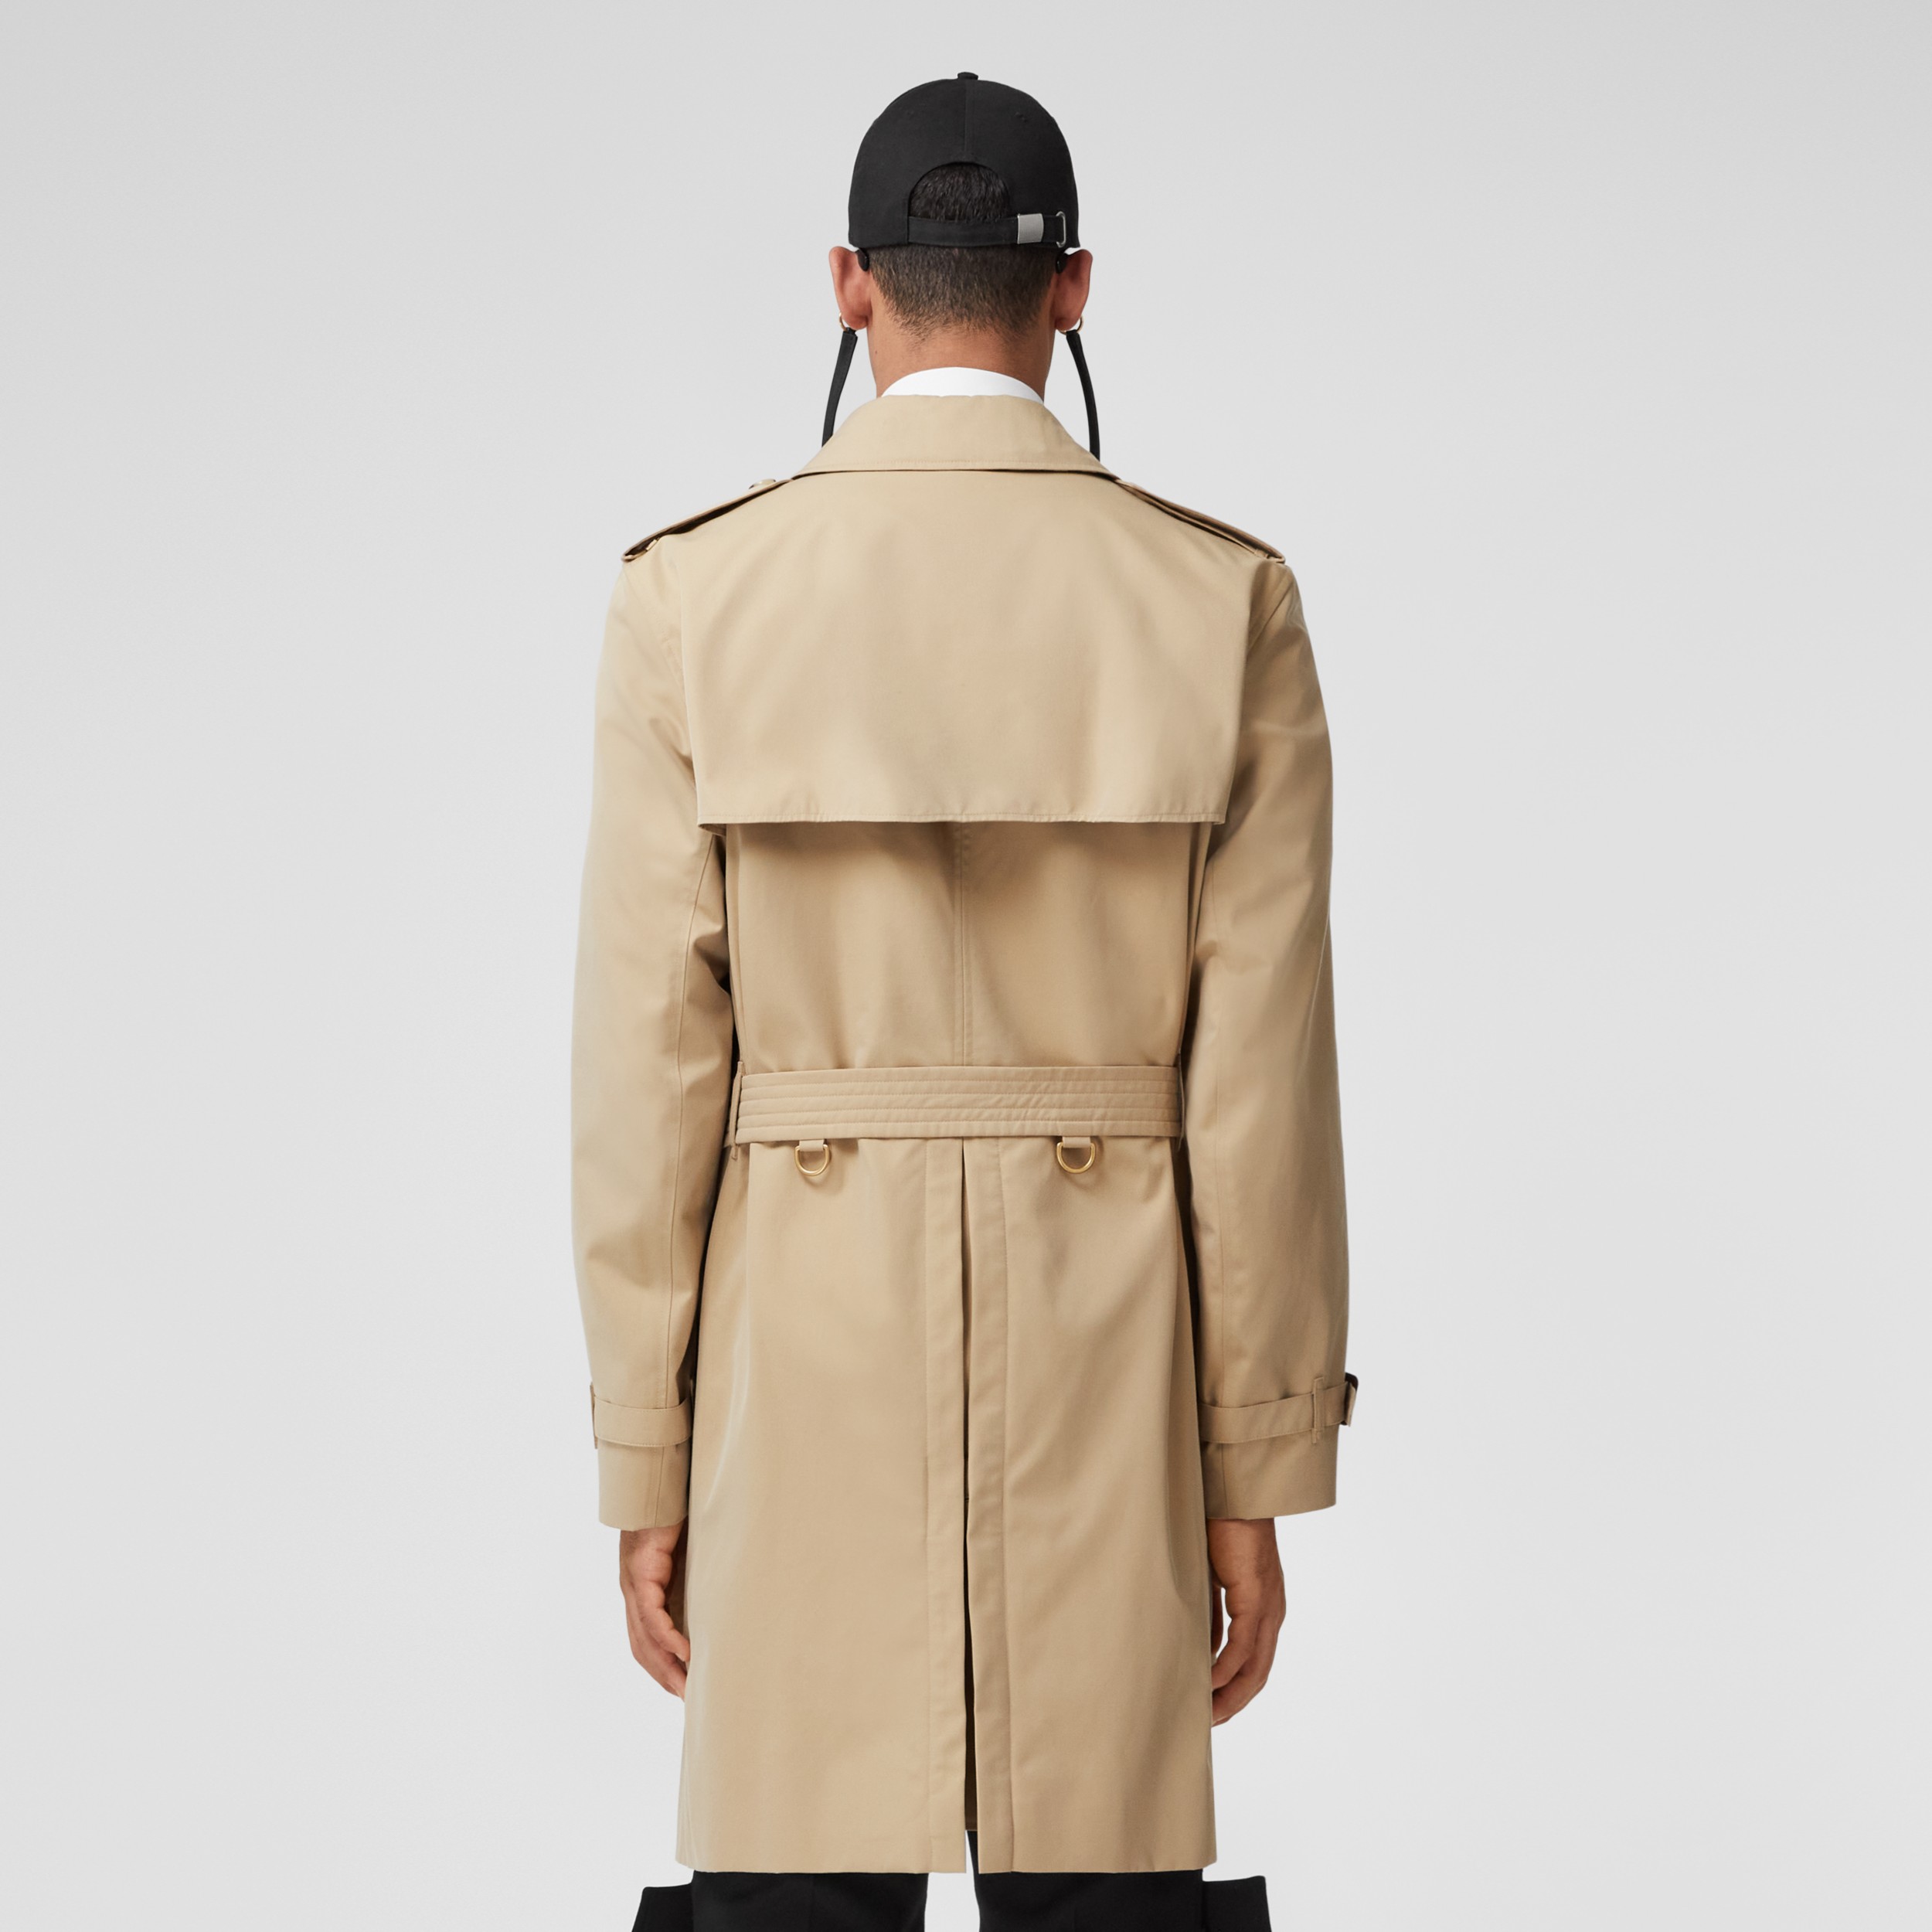 In detail scared dedication burberry heritage trench coat assassination ...